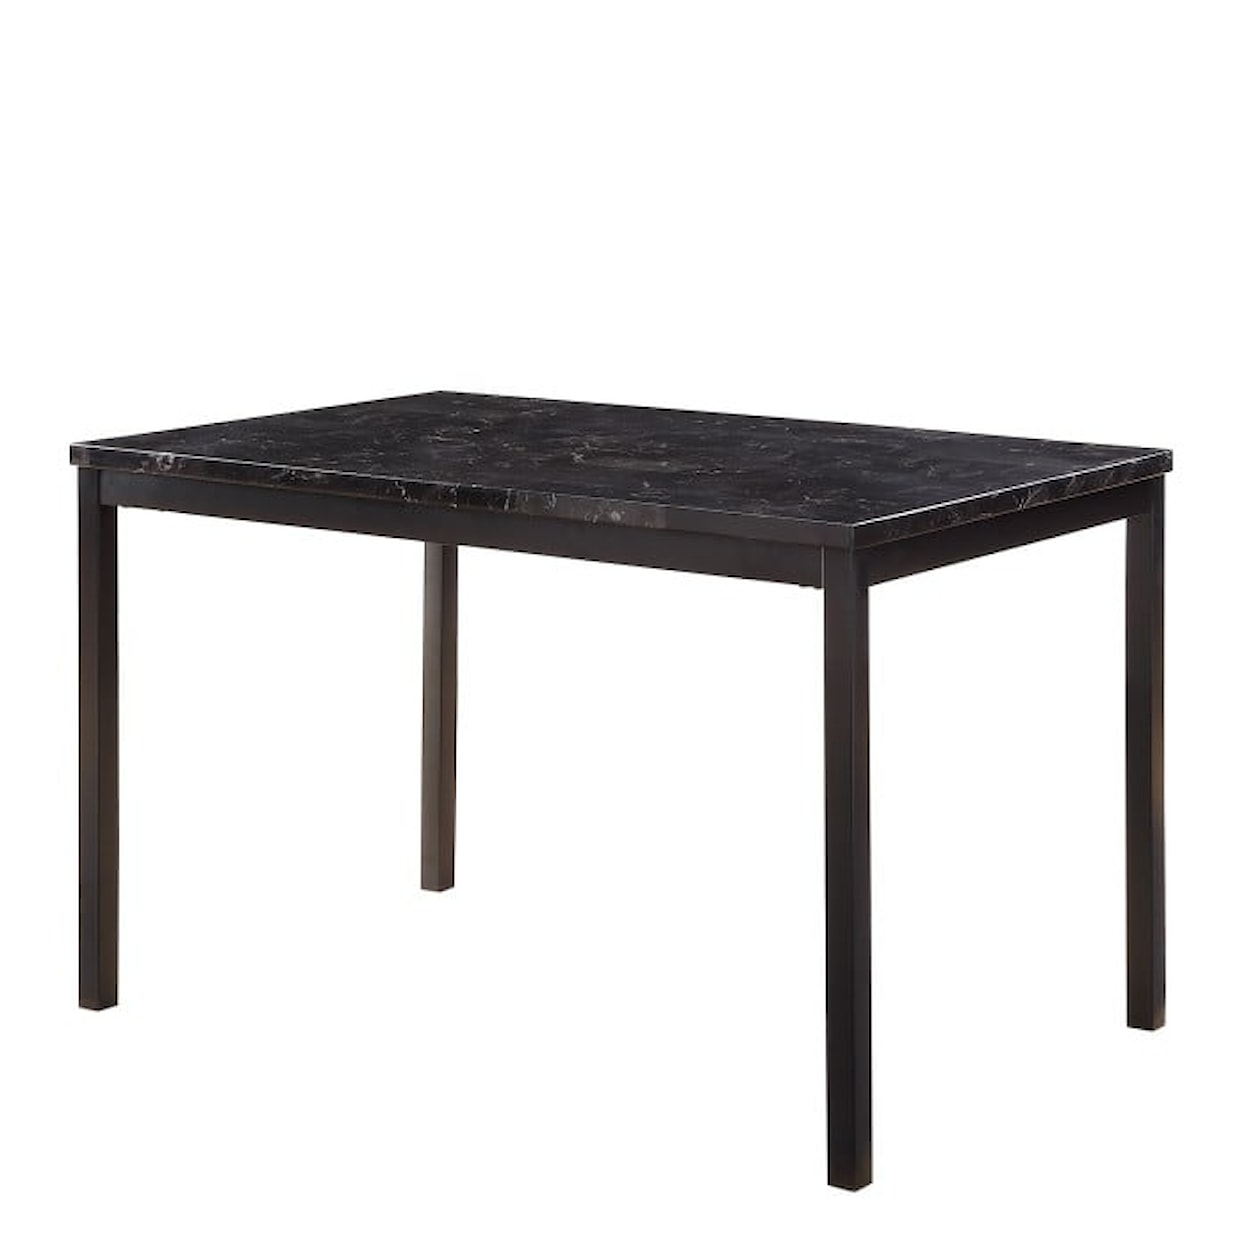 Homelegance Tempe Dining Table